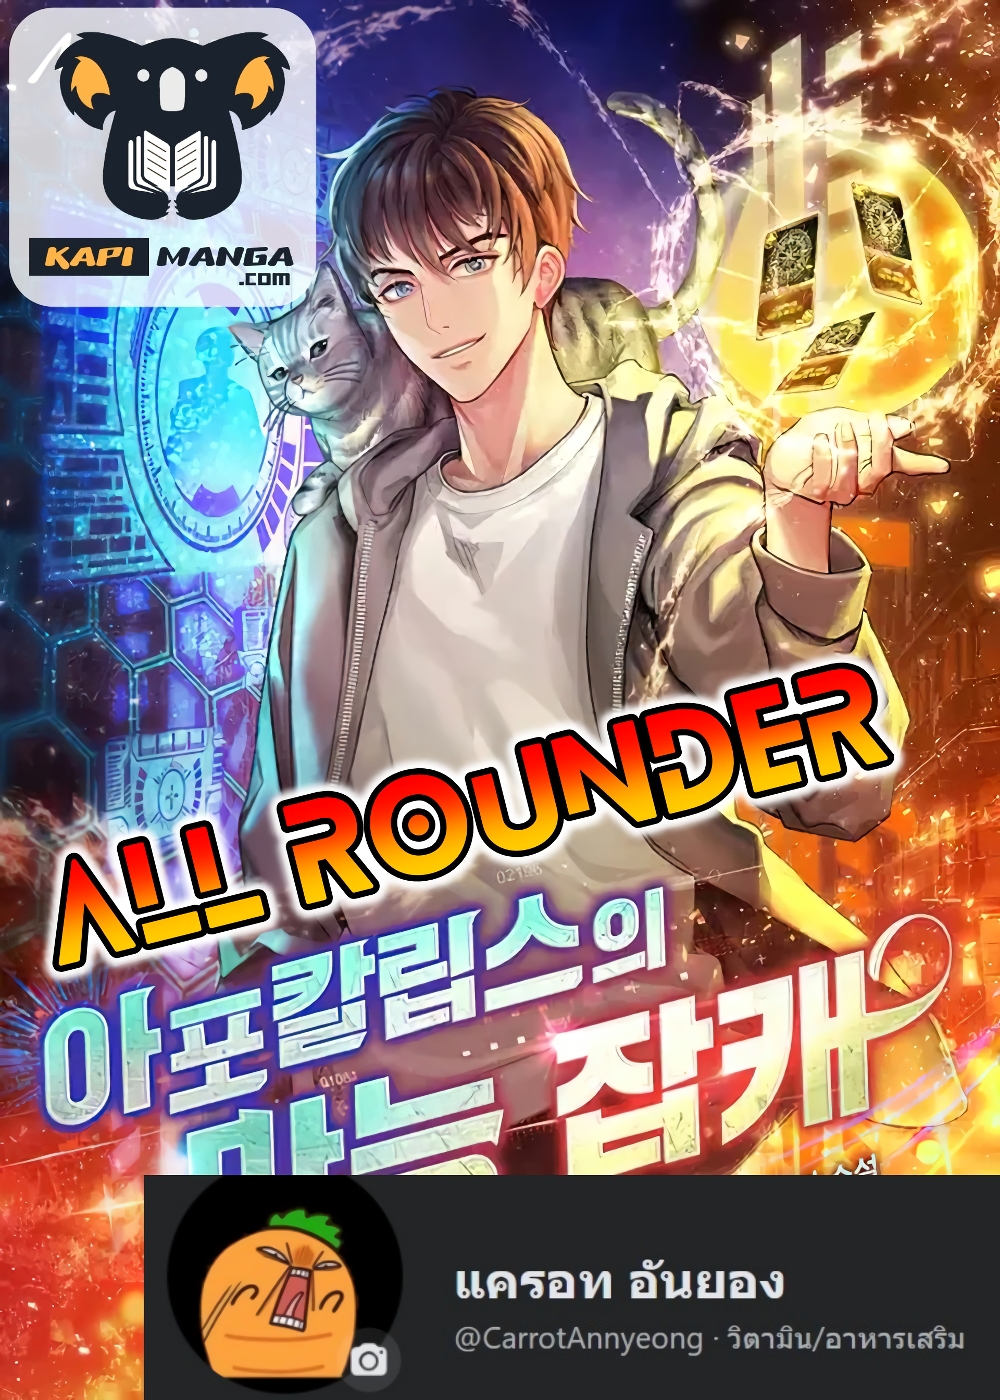 All Rounder33 (1)